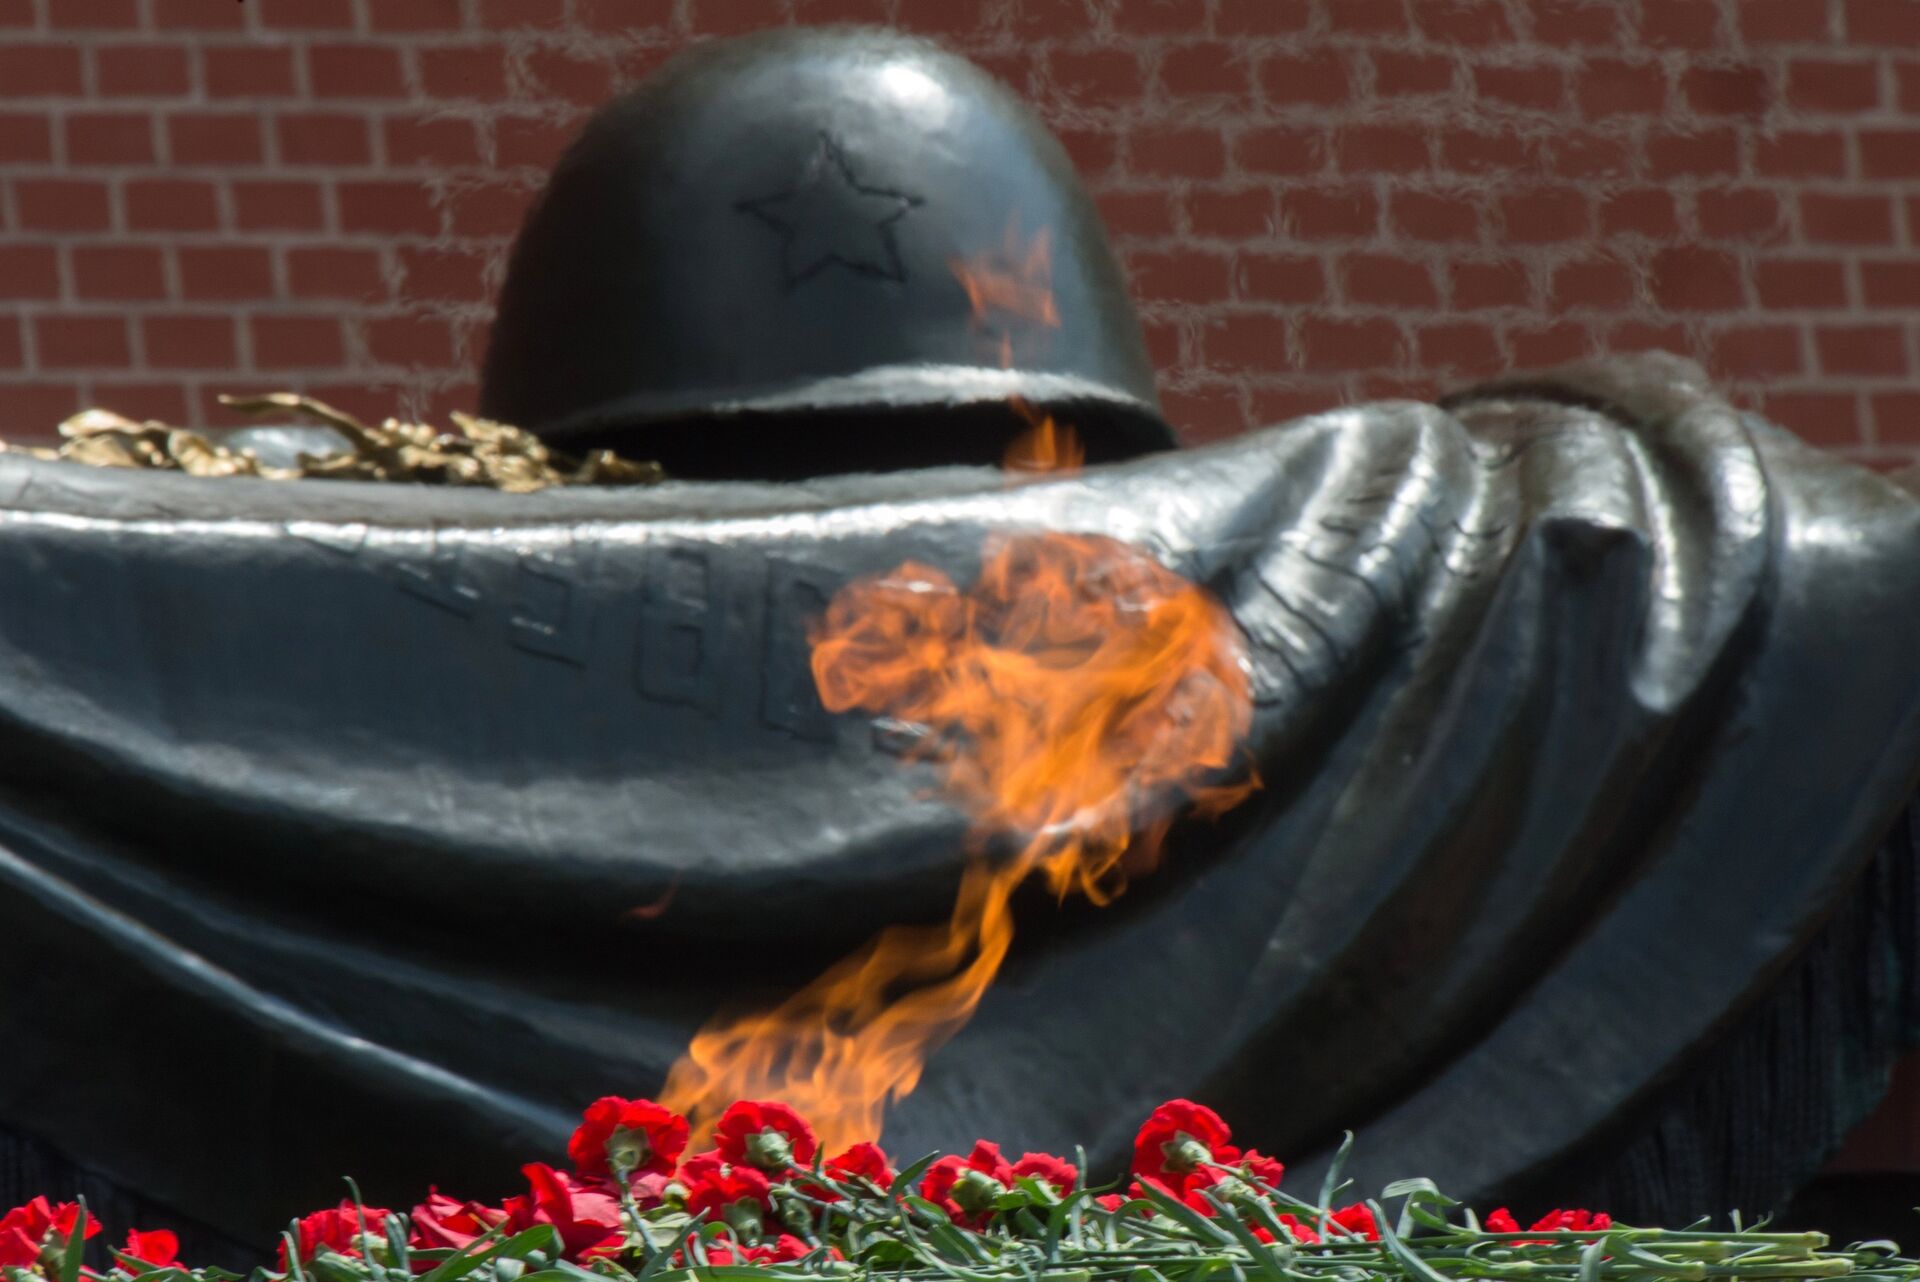 Day of Great Patriotic War Outbreak Still Echoes With Sorrow in Russians' Hearts, Putin Says - Sputnik International, 1920, 22.06.2021